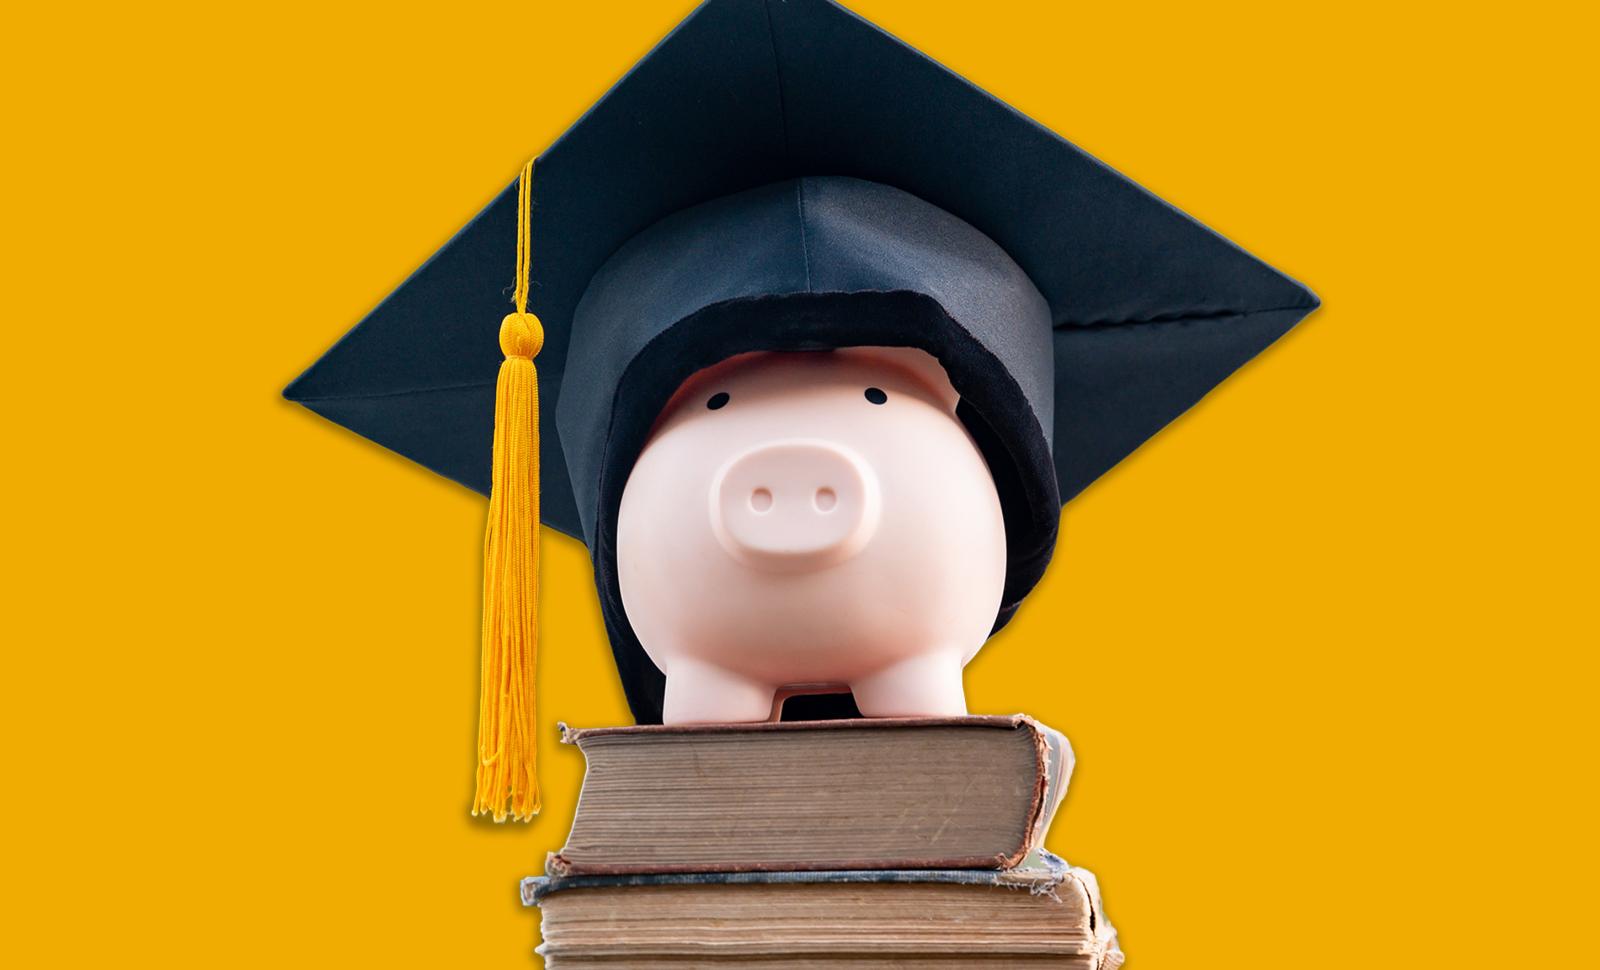 Piggy bank wearing mortar board on top of books